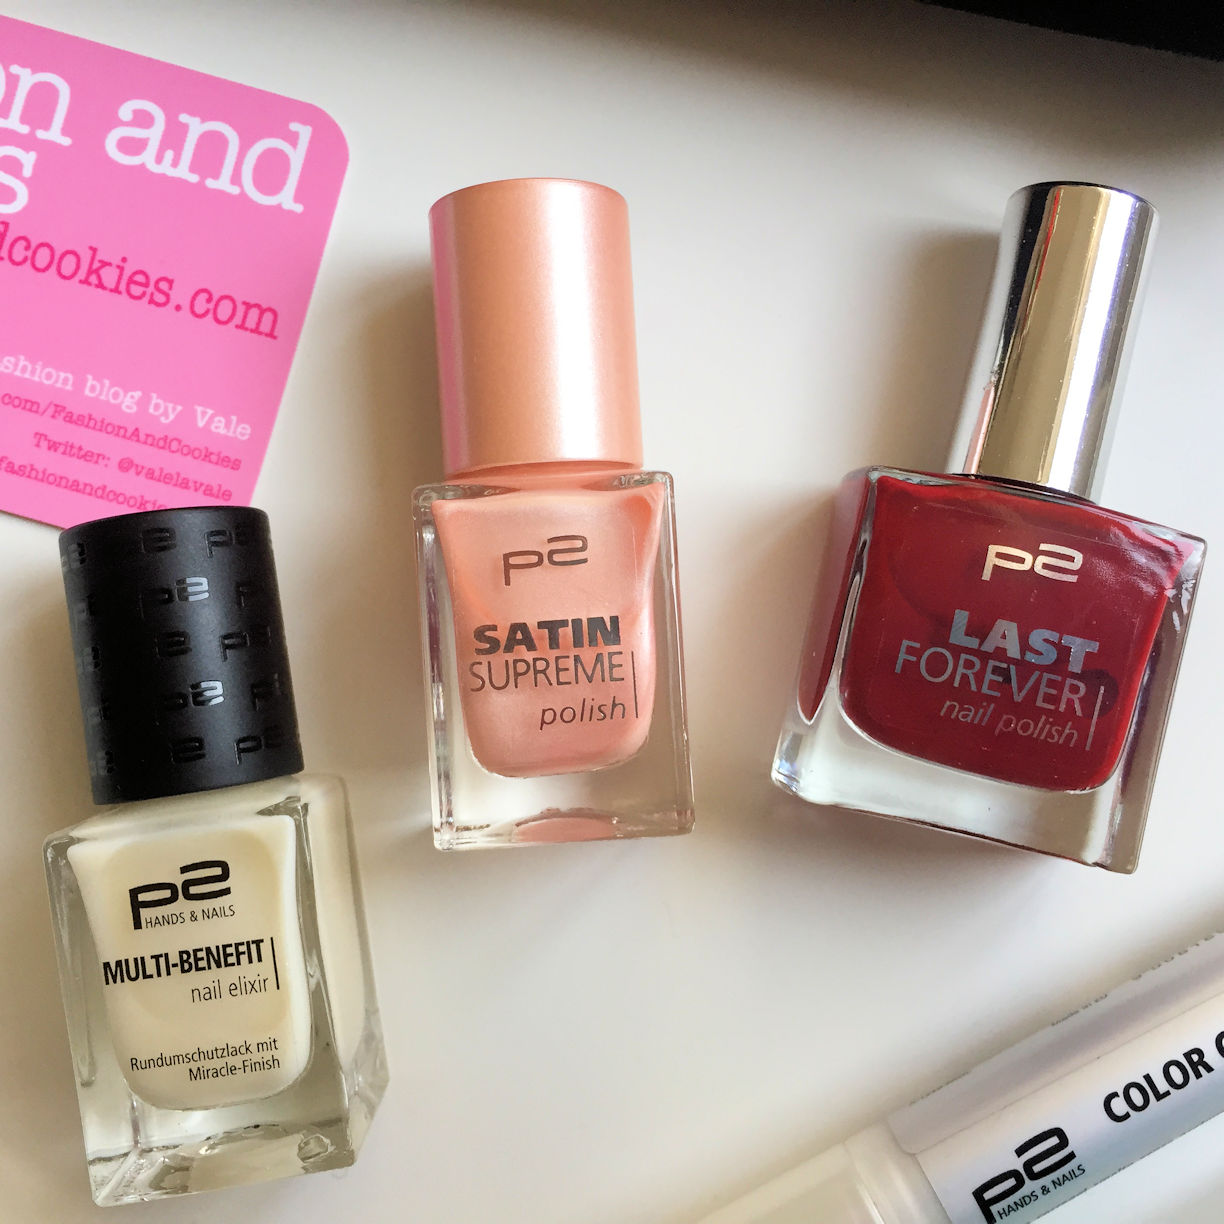 p2 cosmetics Nails & Hands smalti di qualità low cost on Fashion and Cookies beauty blog, beauty blogger